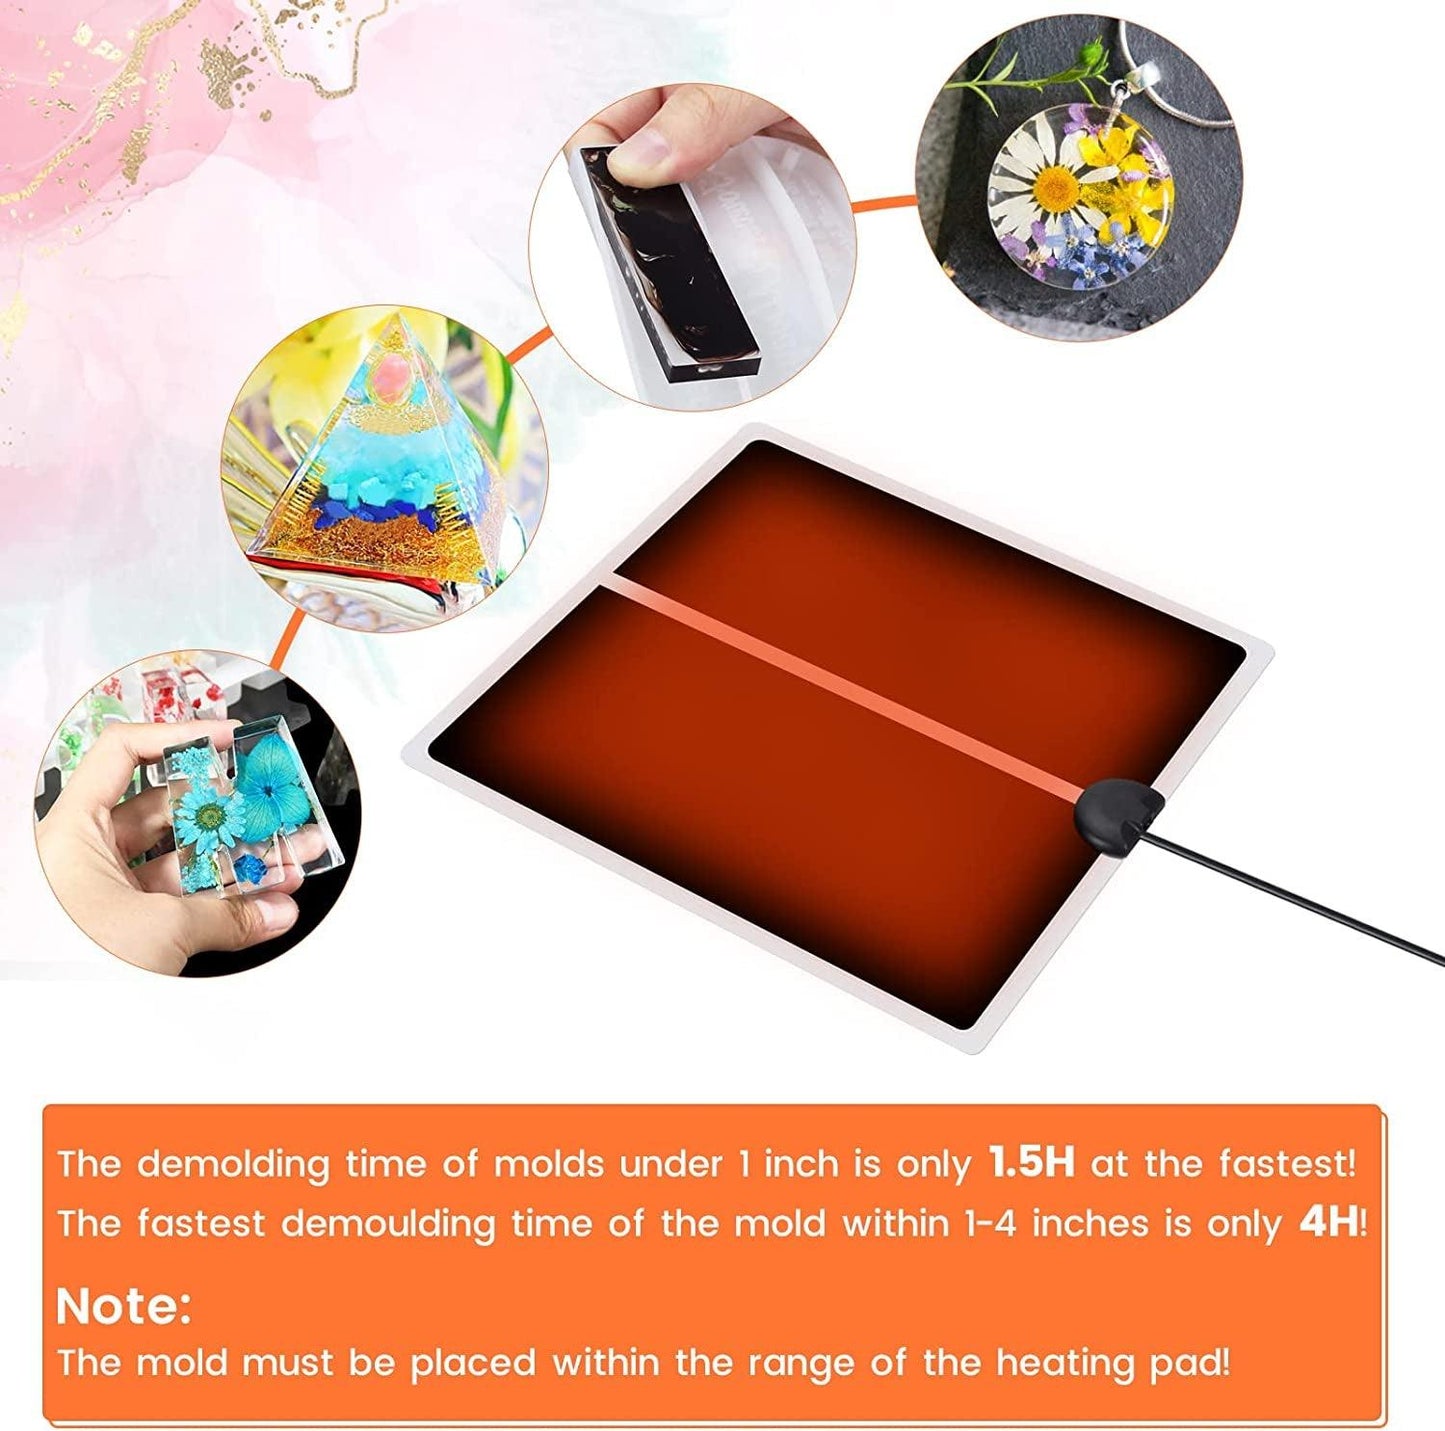 Epoxy Resin Heating Mat, Resin Curing Machine with Cover Timer, Quick Dry Tool Set Heater Coaster for Silicone Molds - WoodArtSupply